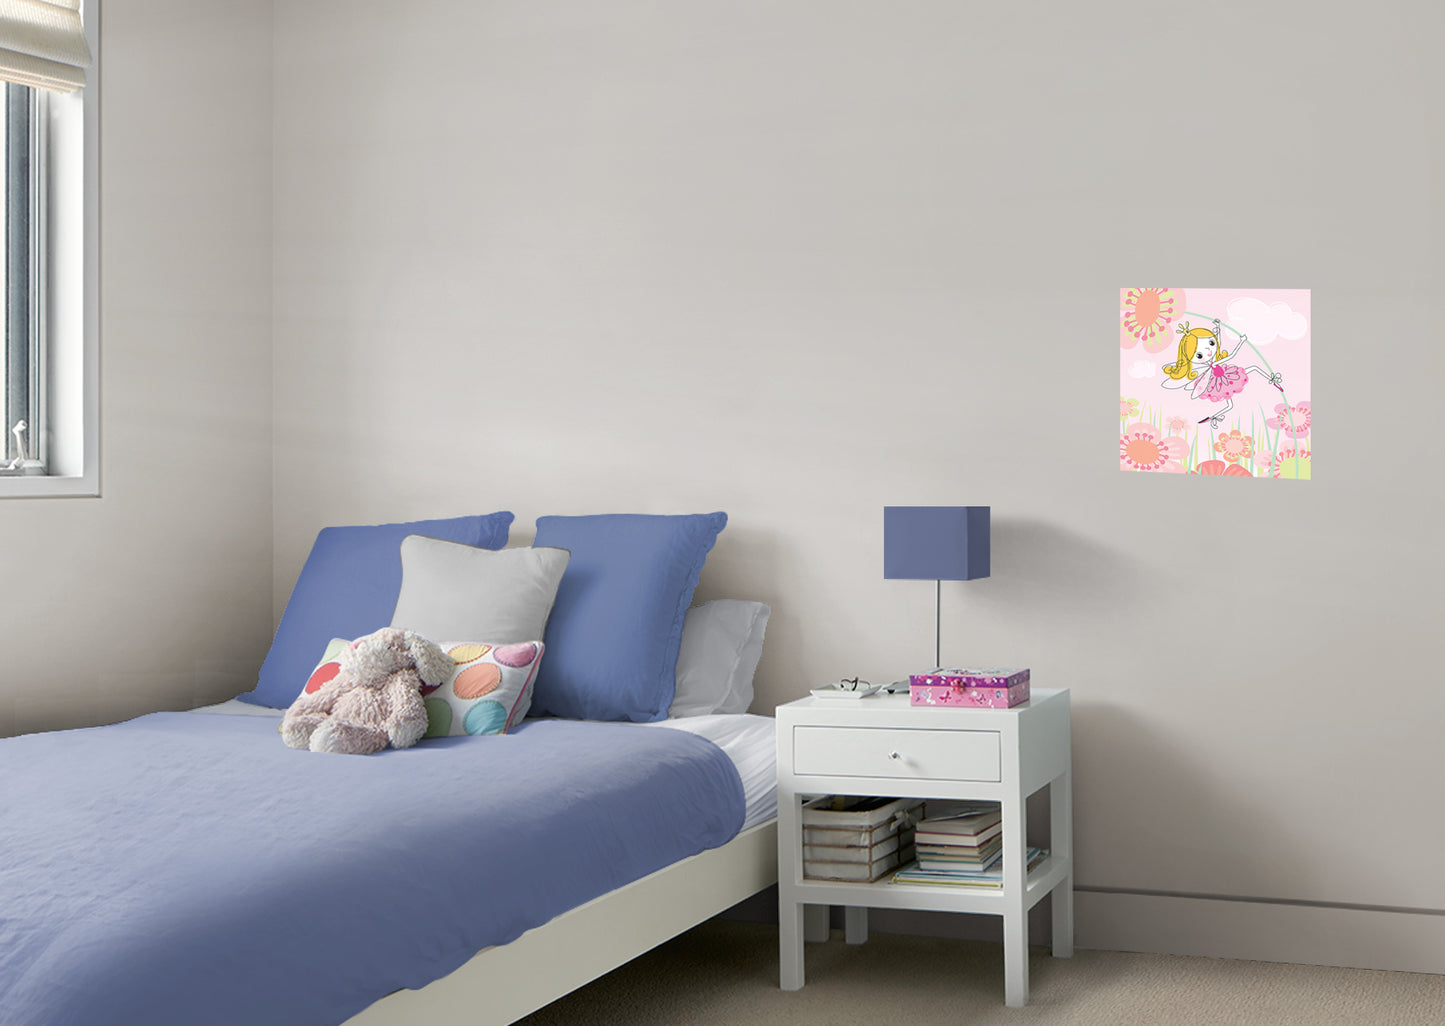 Nursery:  Flowers Mural        -   Removable Wall   Adhesive Decal